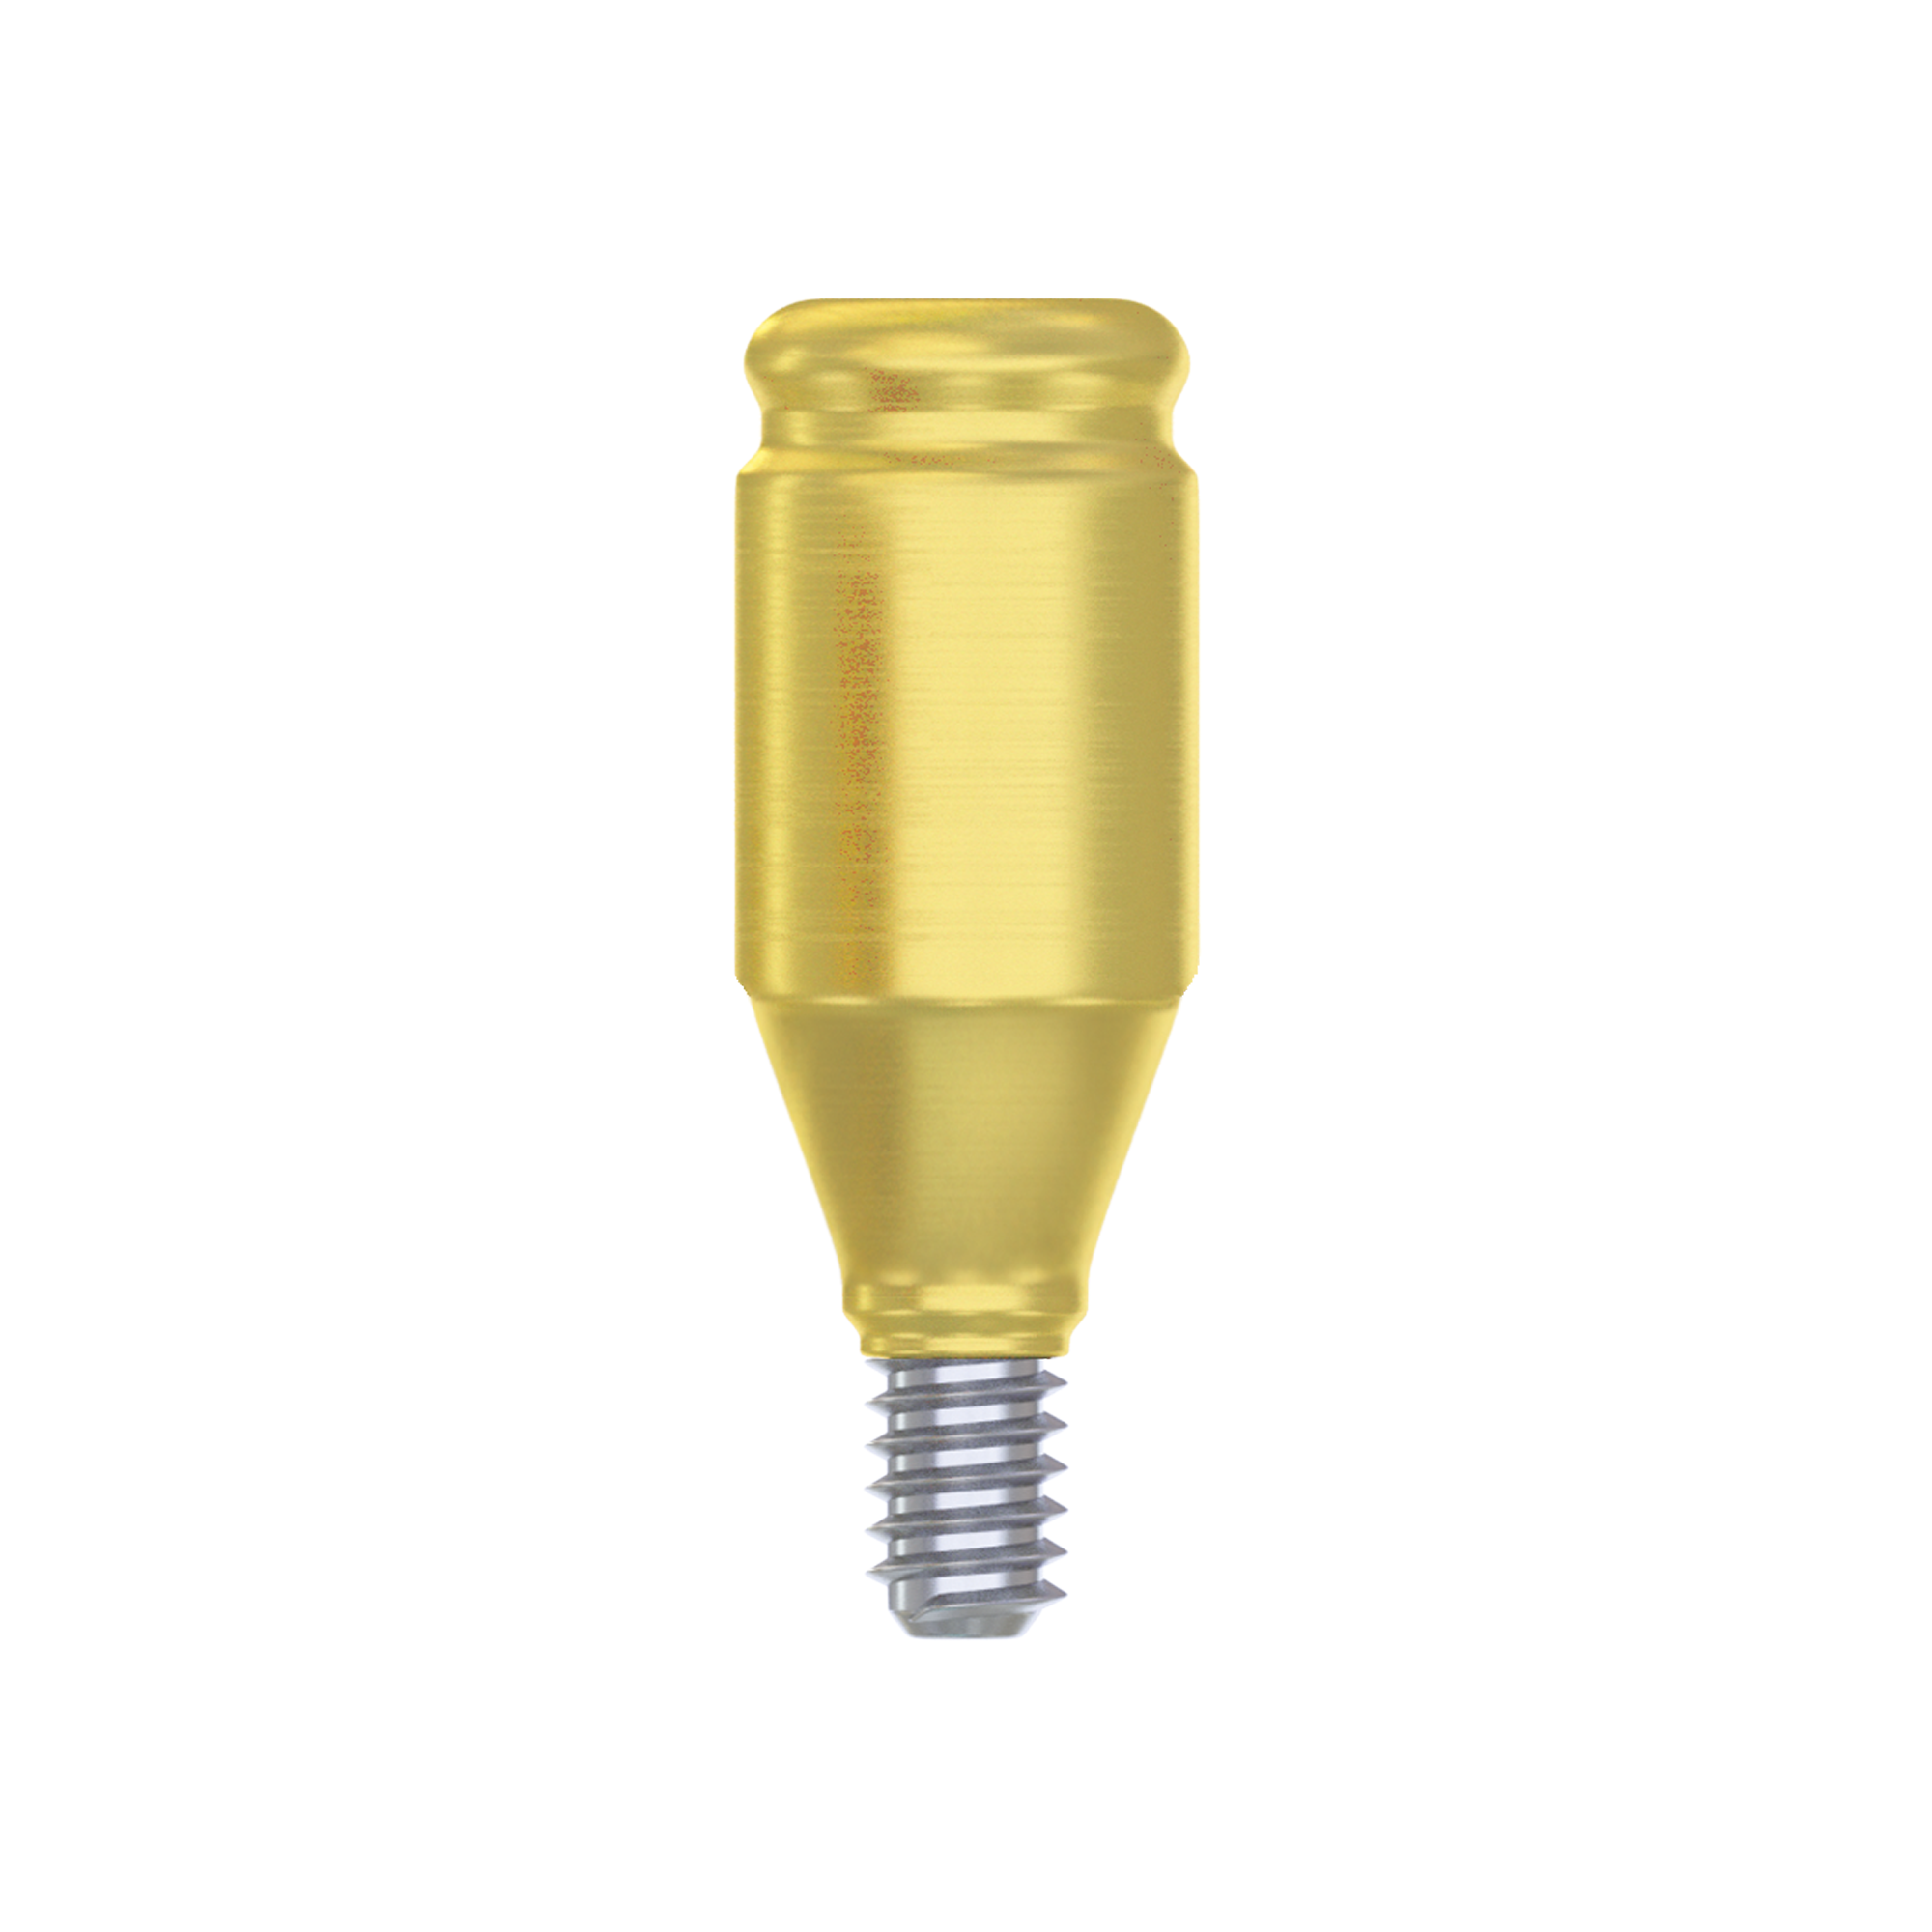 DSI Straight Loc-in Abutment 3.75mm - Conical Connection RP Ø4.3-5.0mm